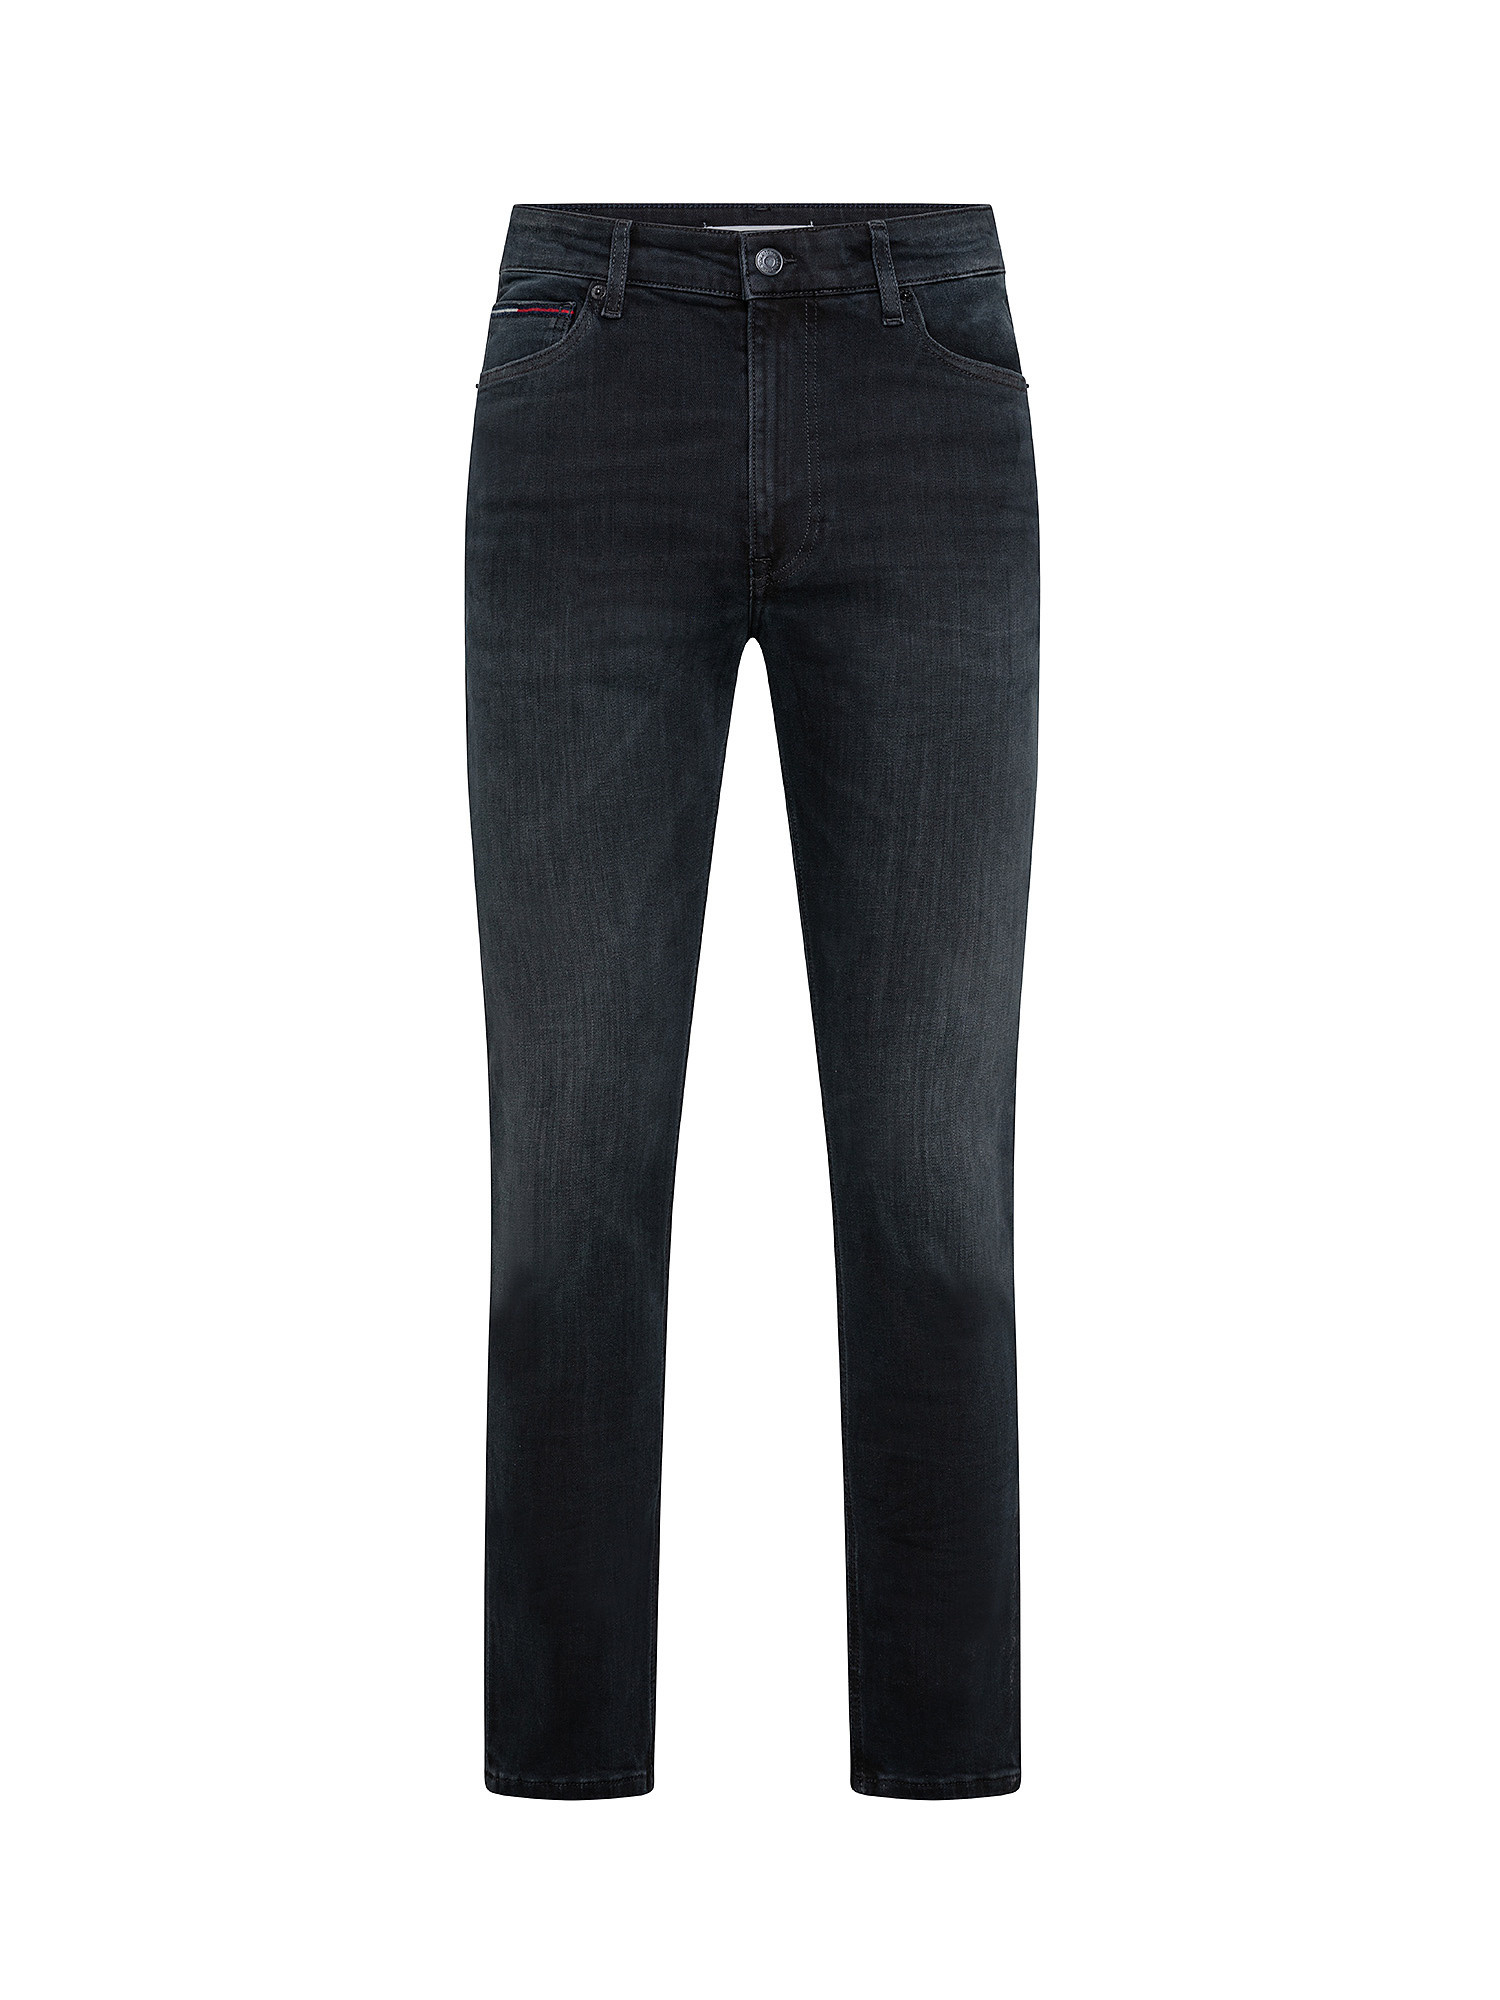 Jeans Simon skinny fit, Nero, large image number 0